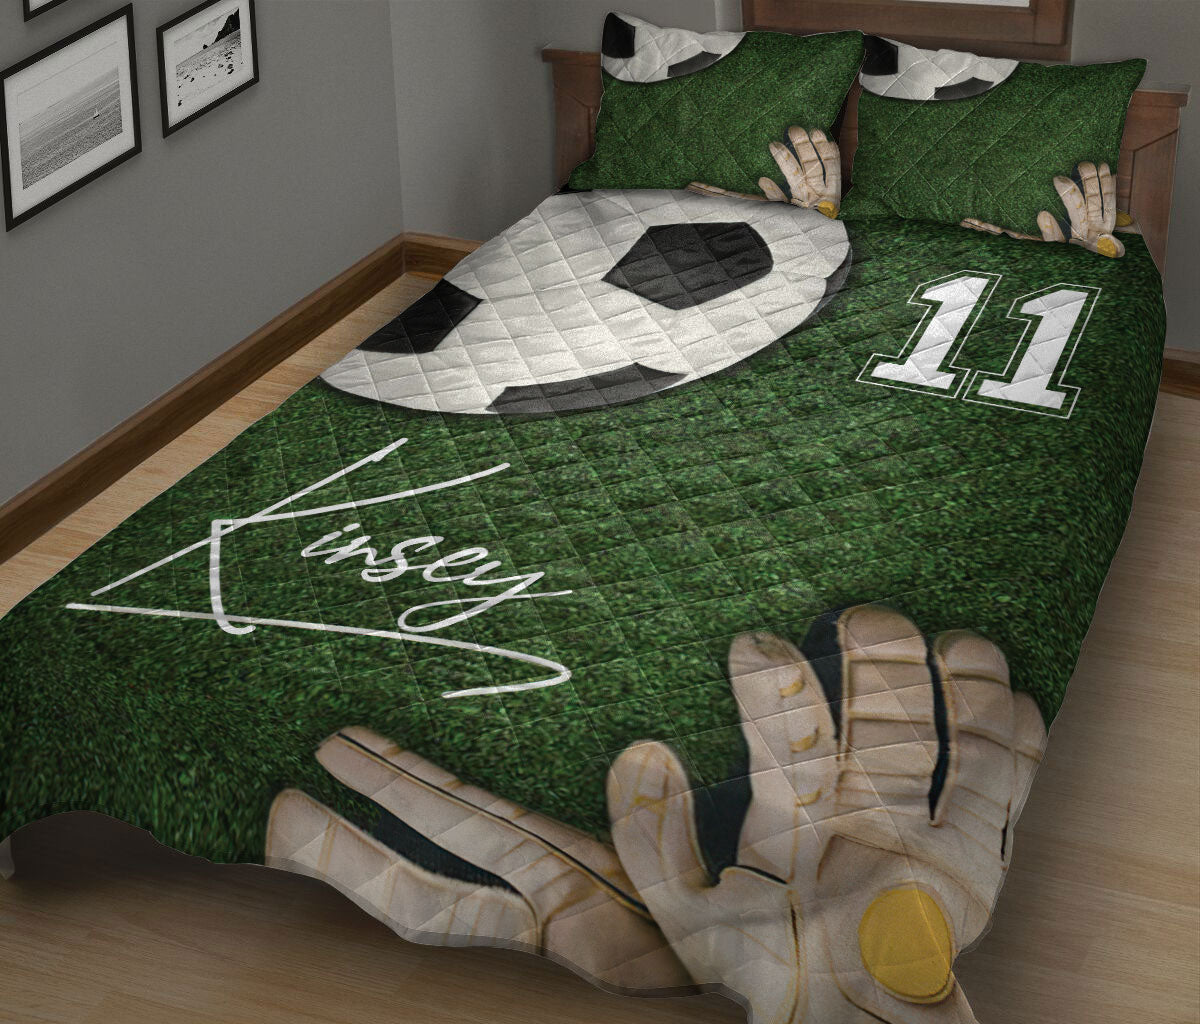 Ohaprints-Quilt-Bed-Set-Pillowcase-Soccer-Field-Ball-Glove-Goalkeeper-Custom-Personalized-Name-Number-Blanket-Bedspread-Bedding-1841-King (90'' x 100'')